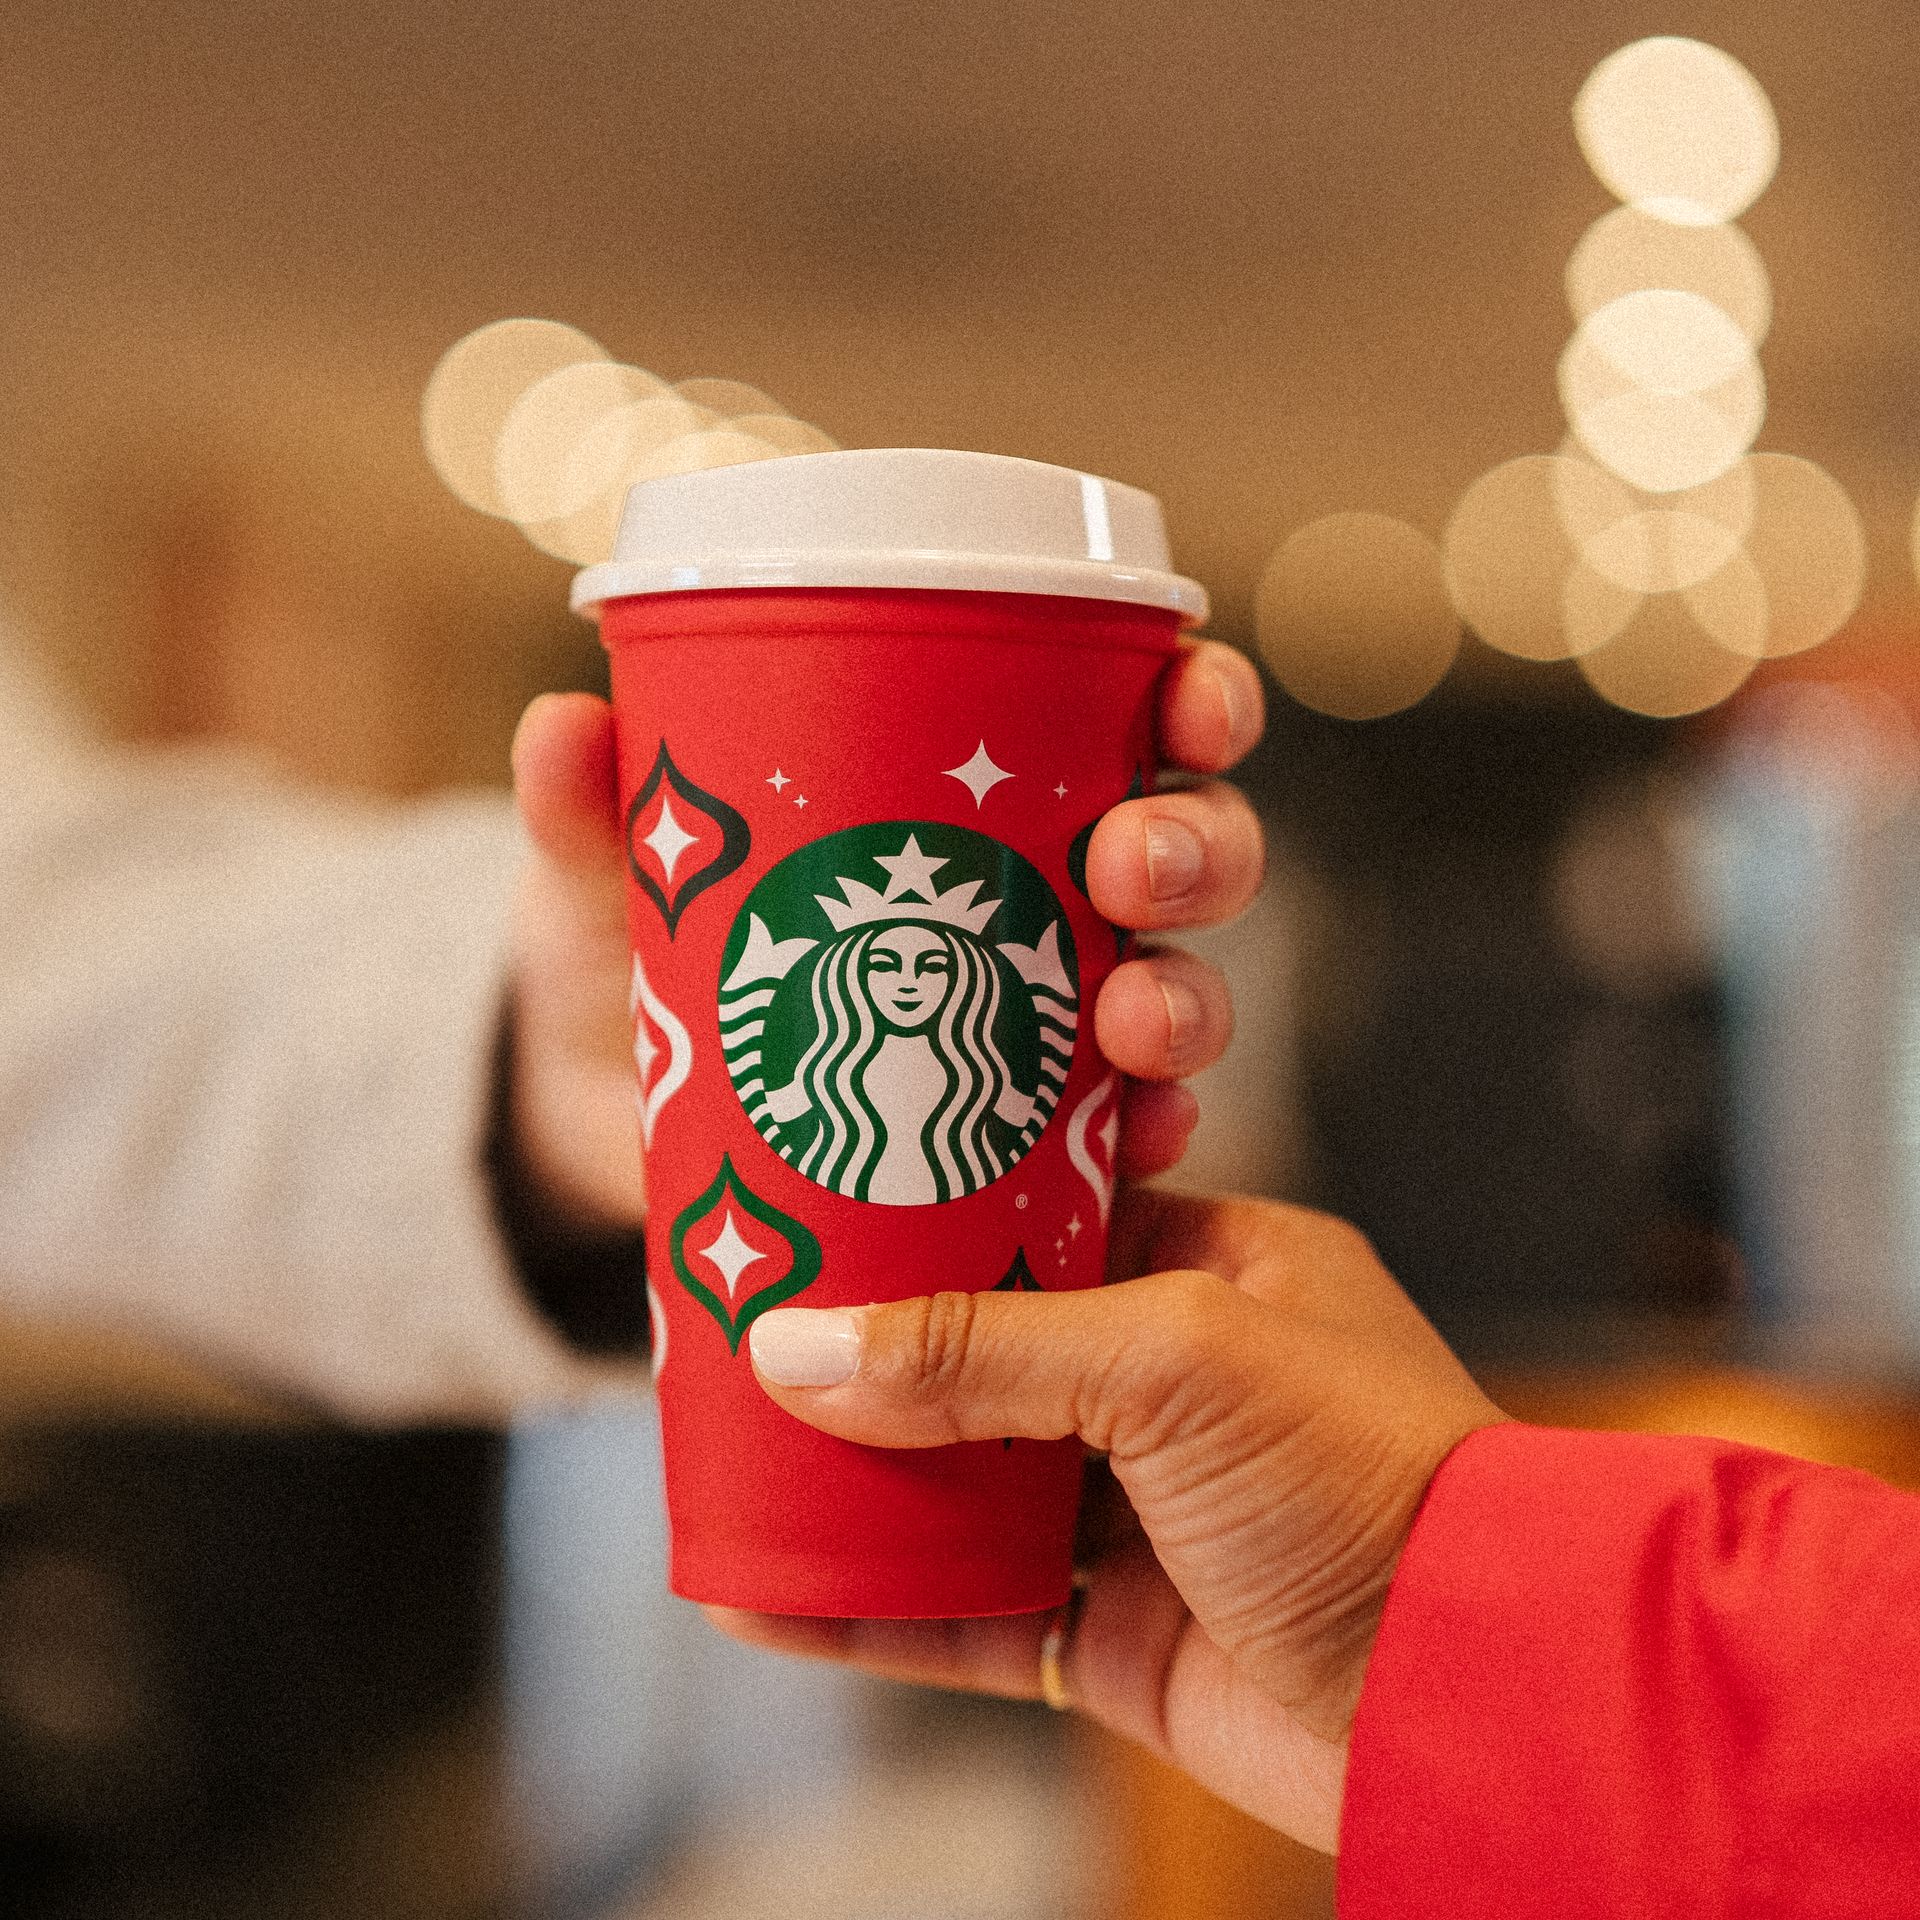 Starbucks's New Holiday Cups Have Arrived in Stores, According to